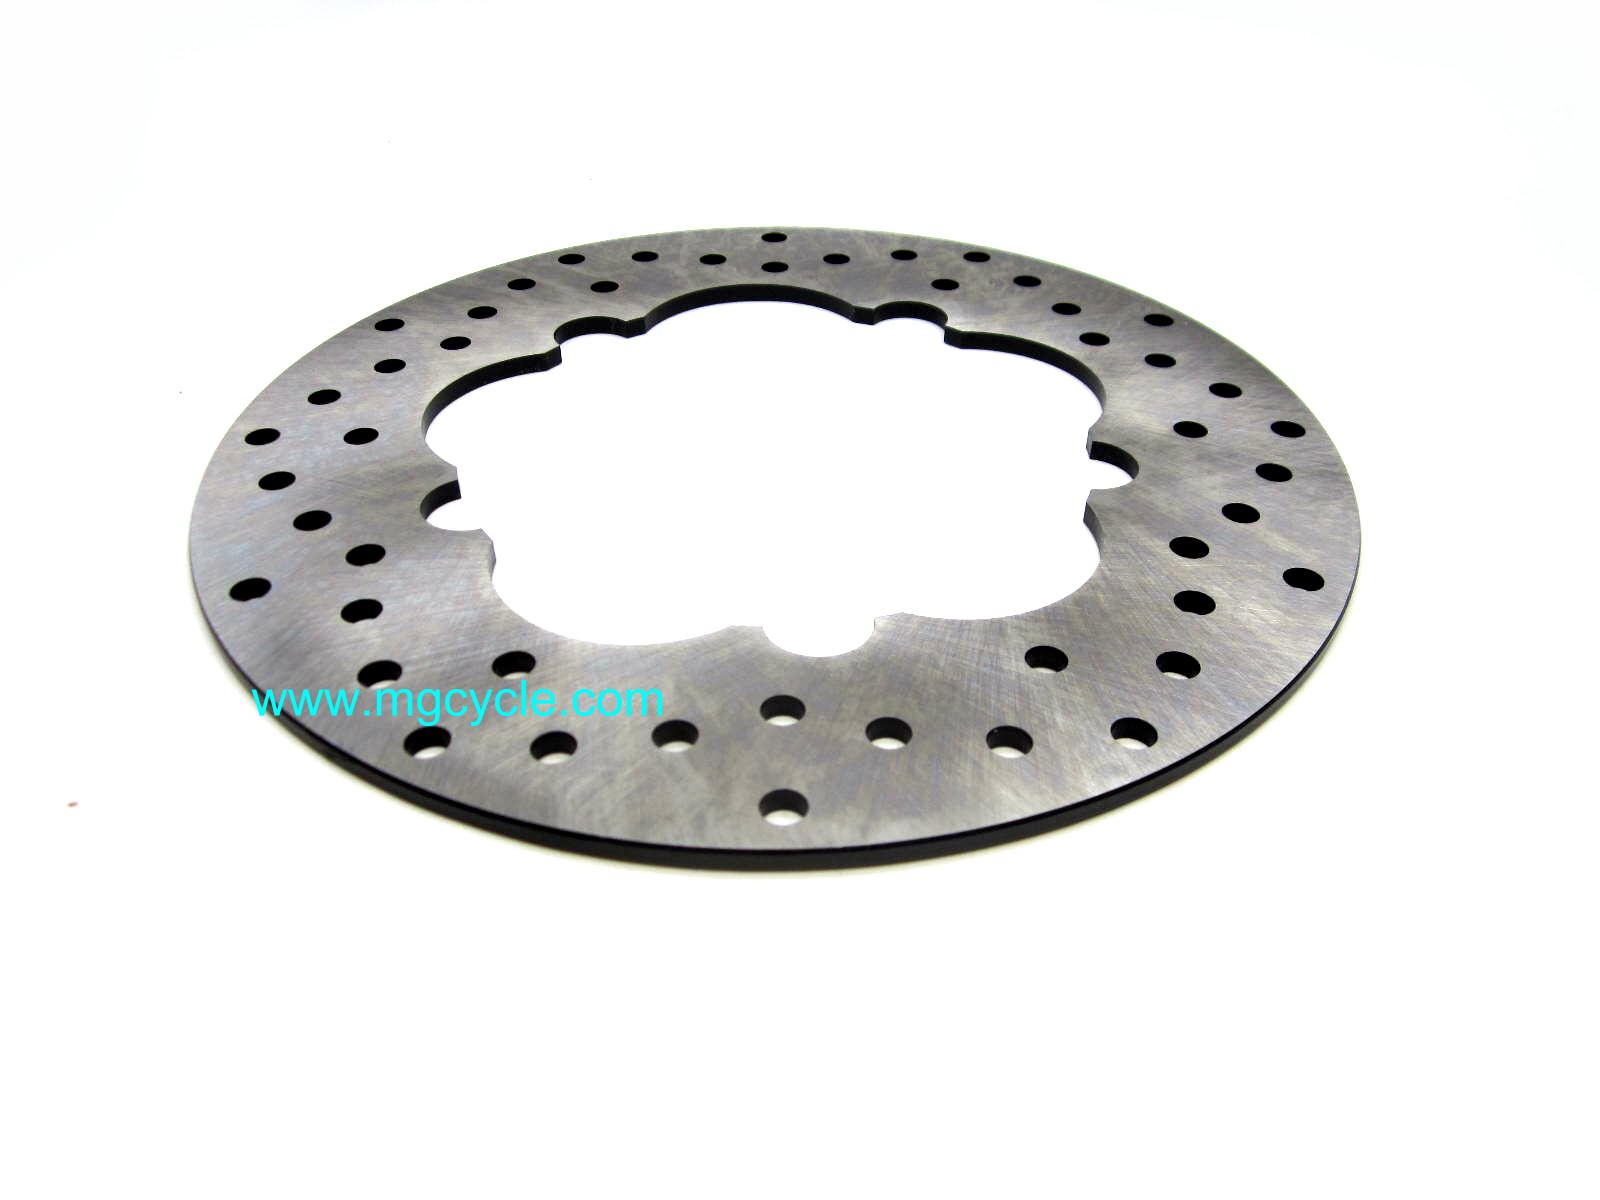 Brake disk LM4/5 SP3 Cal3 1000S, outer ring GU28613670